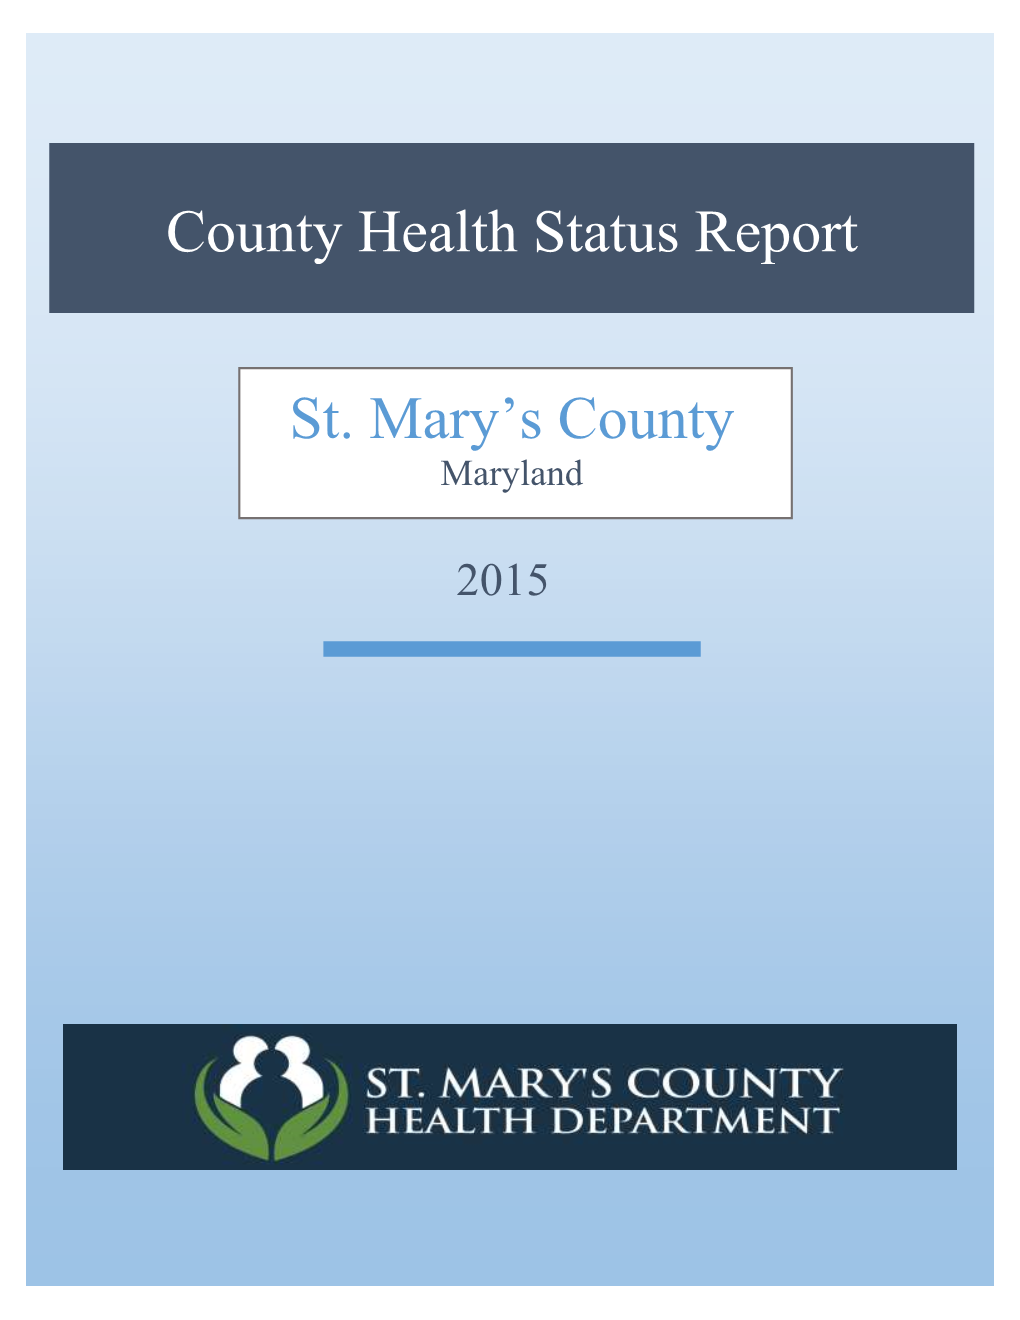 St. Mary's County Health Status Report 2015